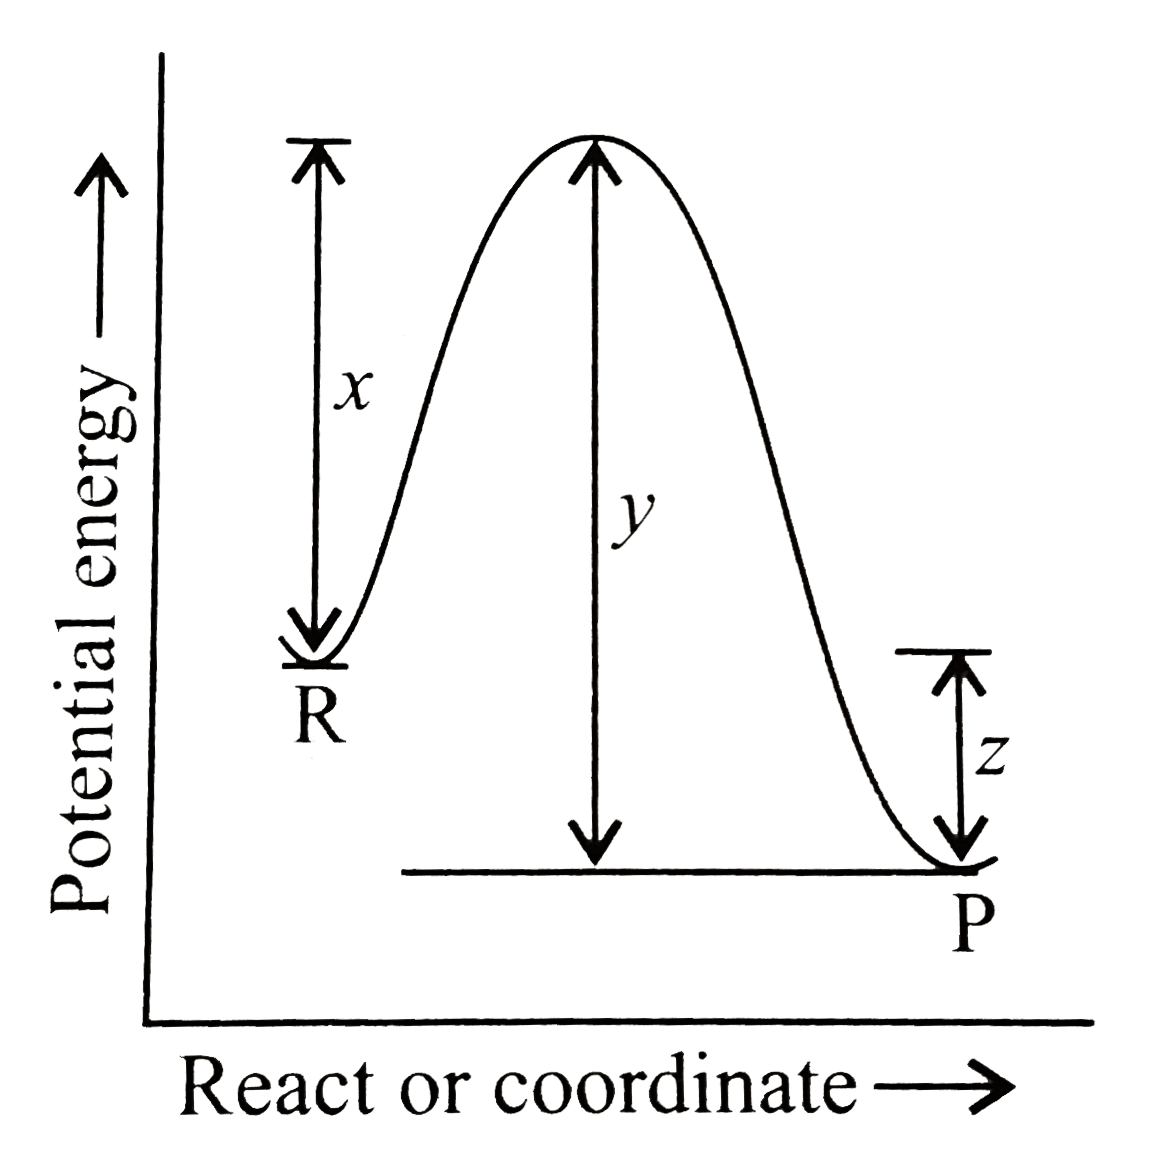 The potential energy diagram for a reaction R rarr P is given below. Delta H^(ɵ) of the reaction corresponds to the energy